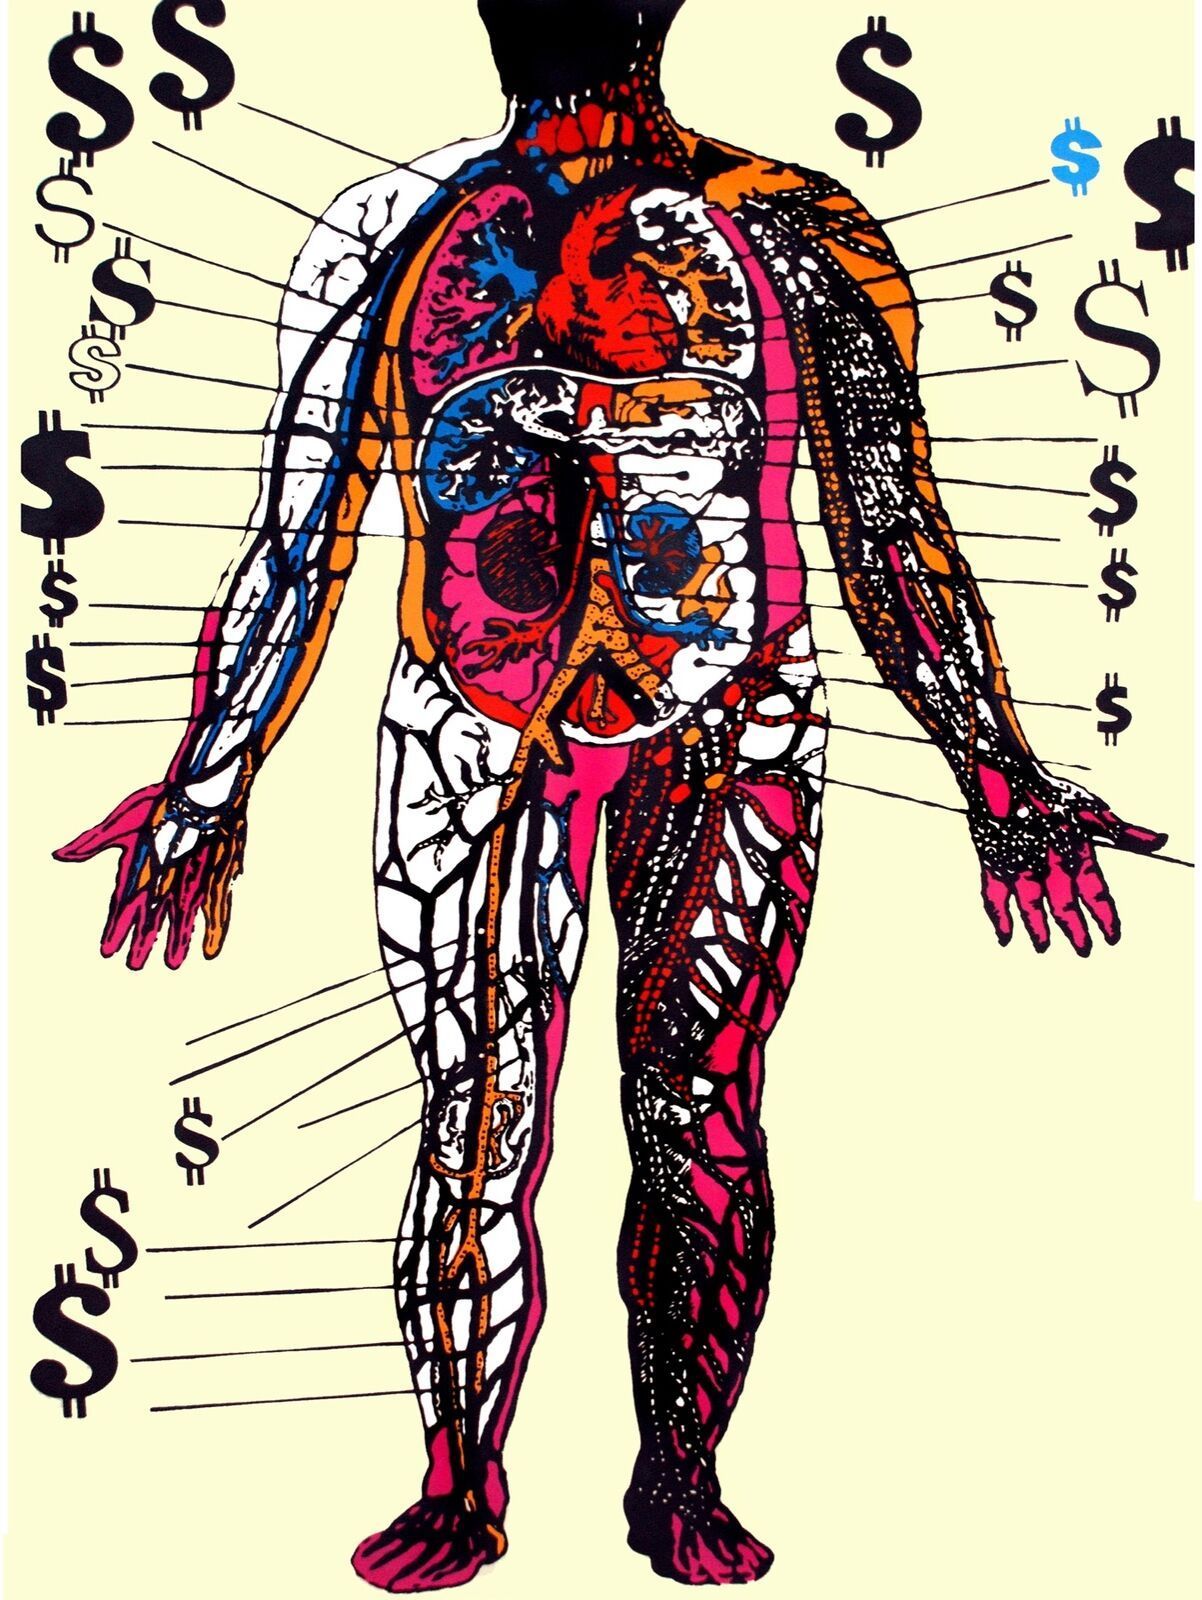 1889 Human anatomy with Dollars signs on side quality 18x24 Poster.Decorative Ar - $28.00